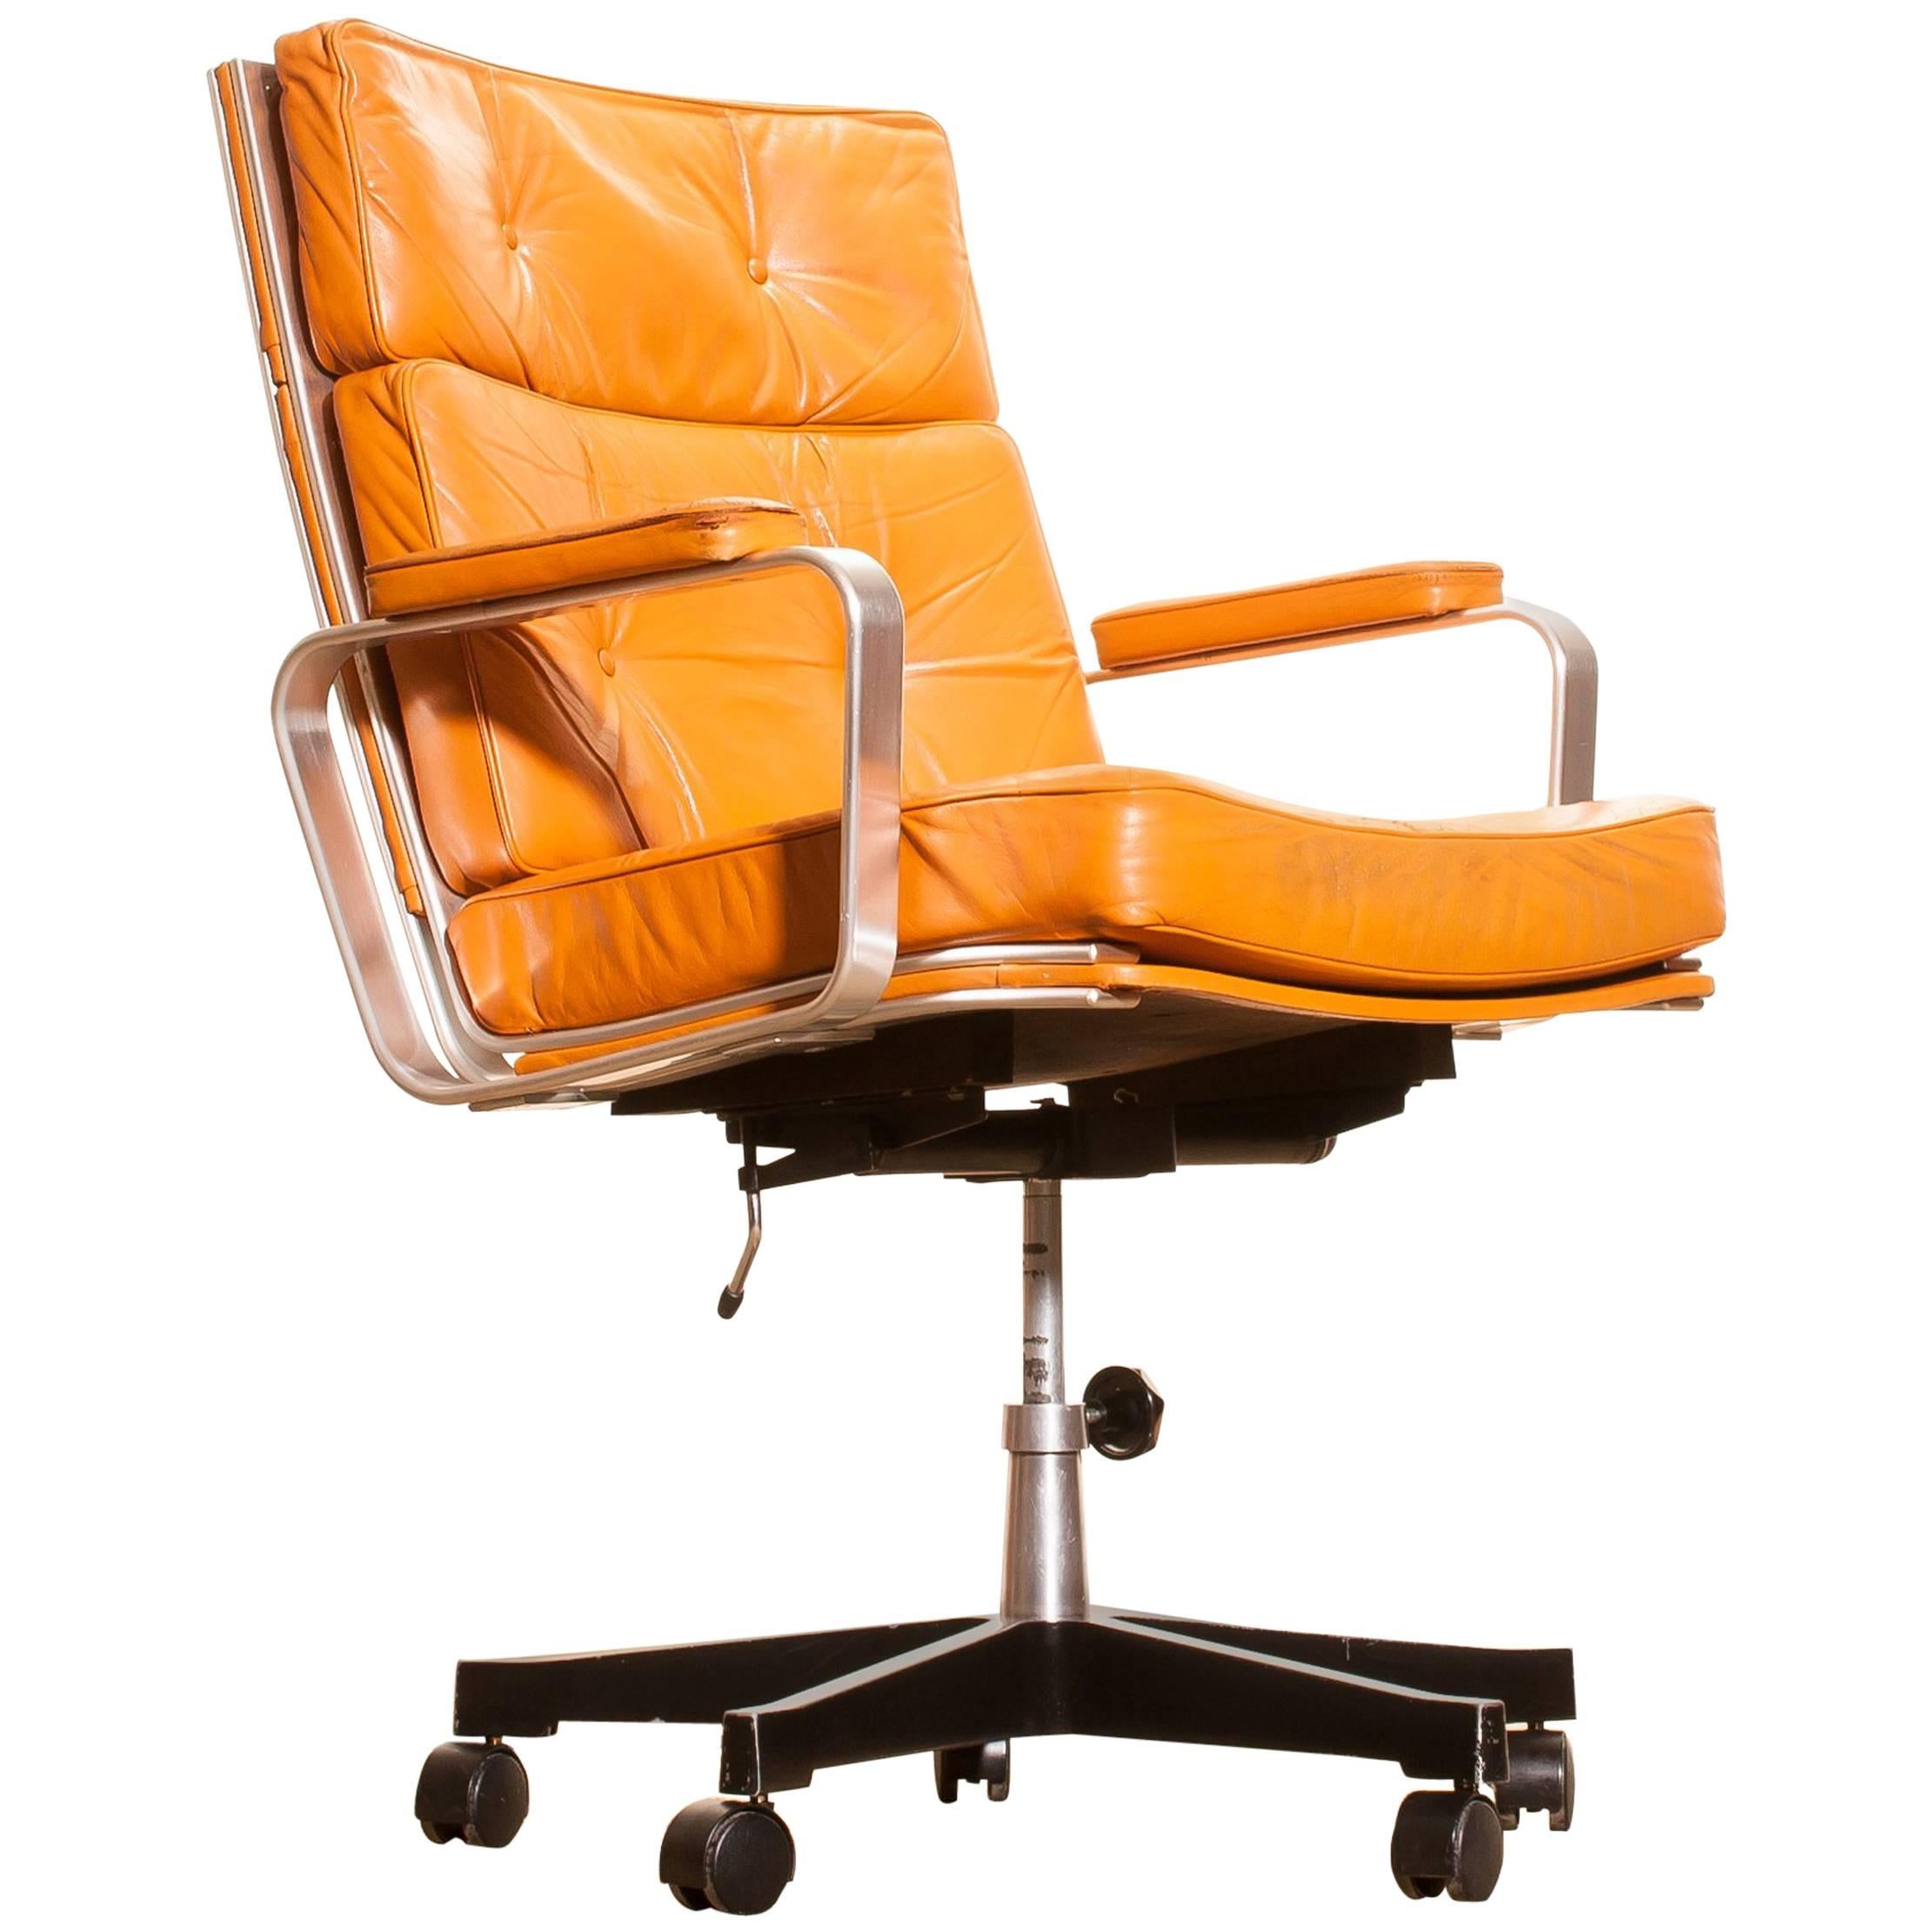 1970s, Leather and Aluminium Desk Chair by Karl Erik Ekselius